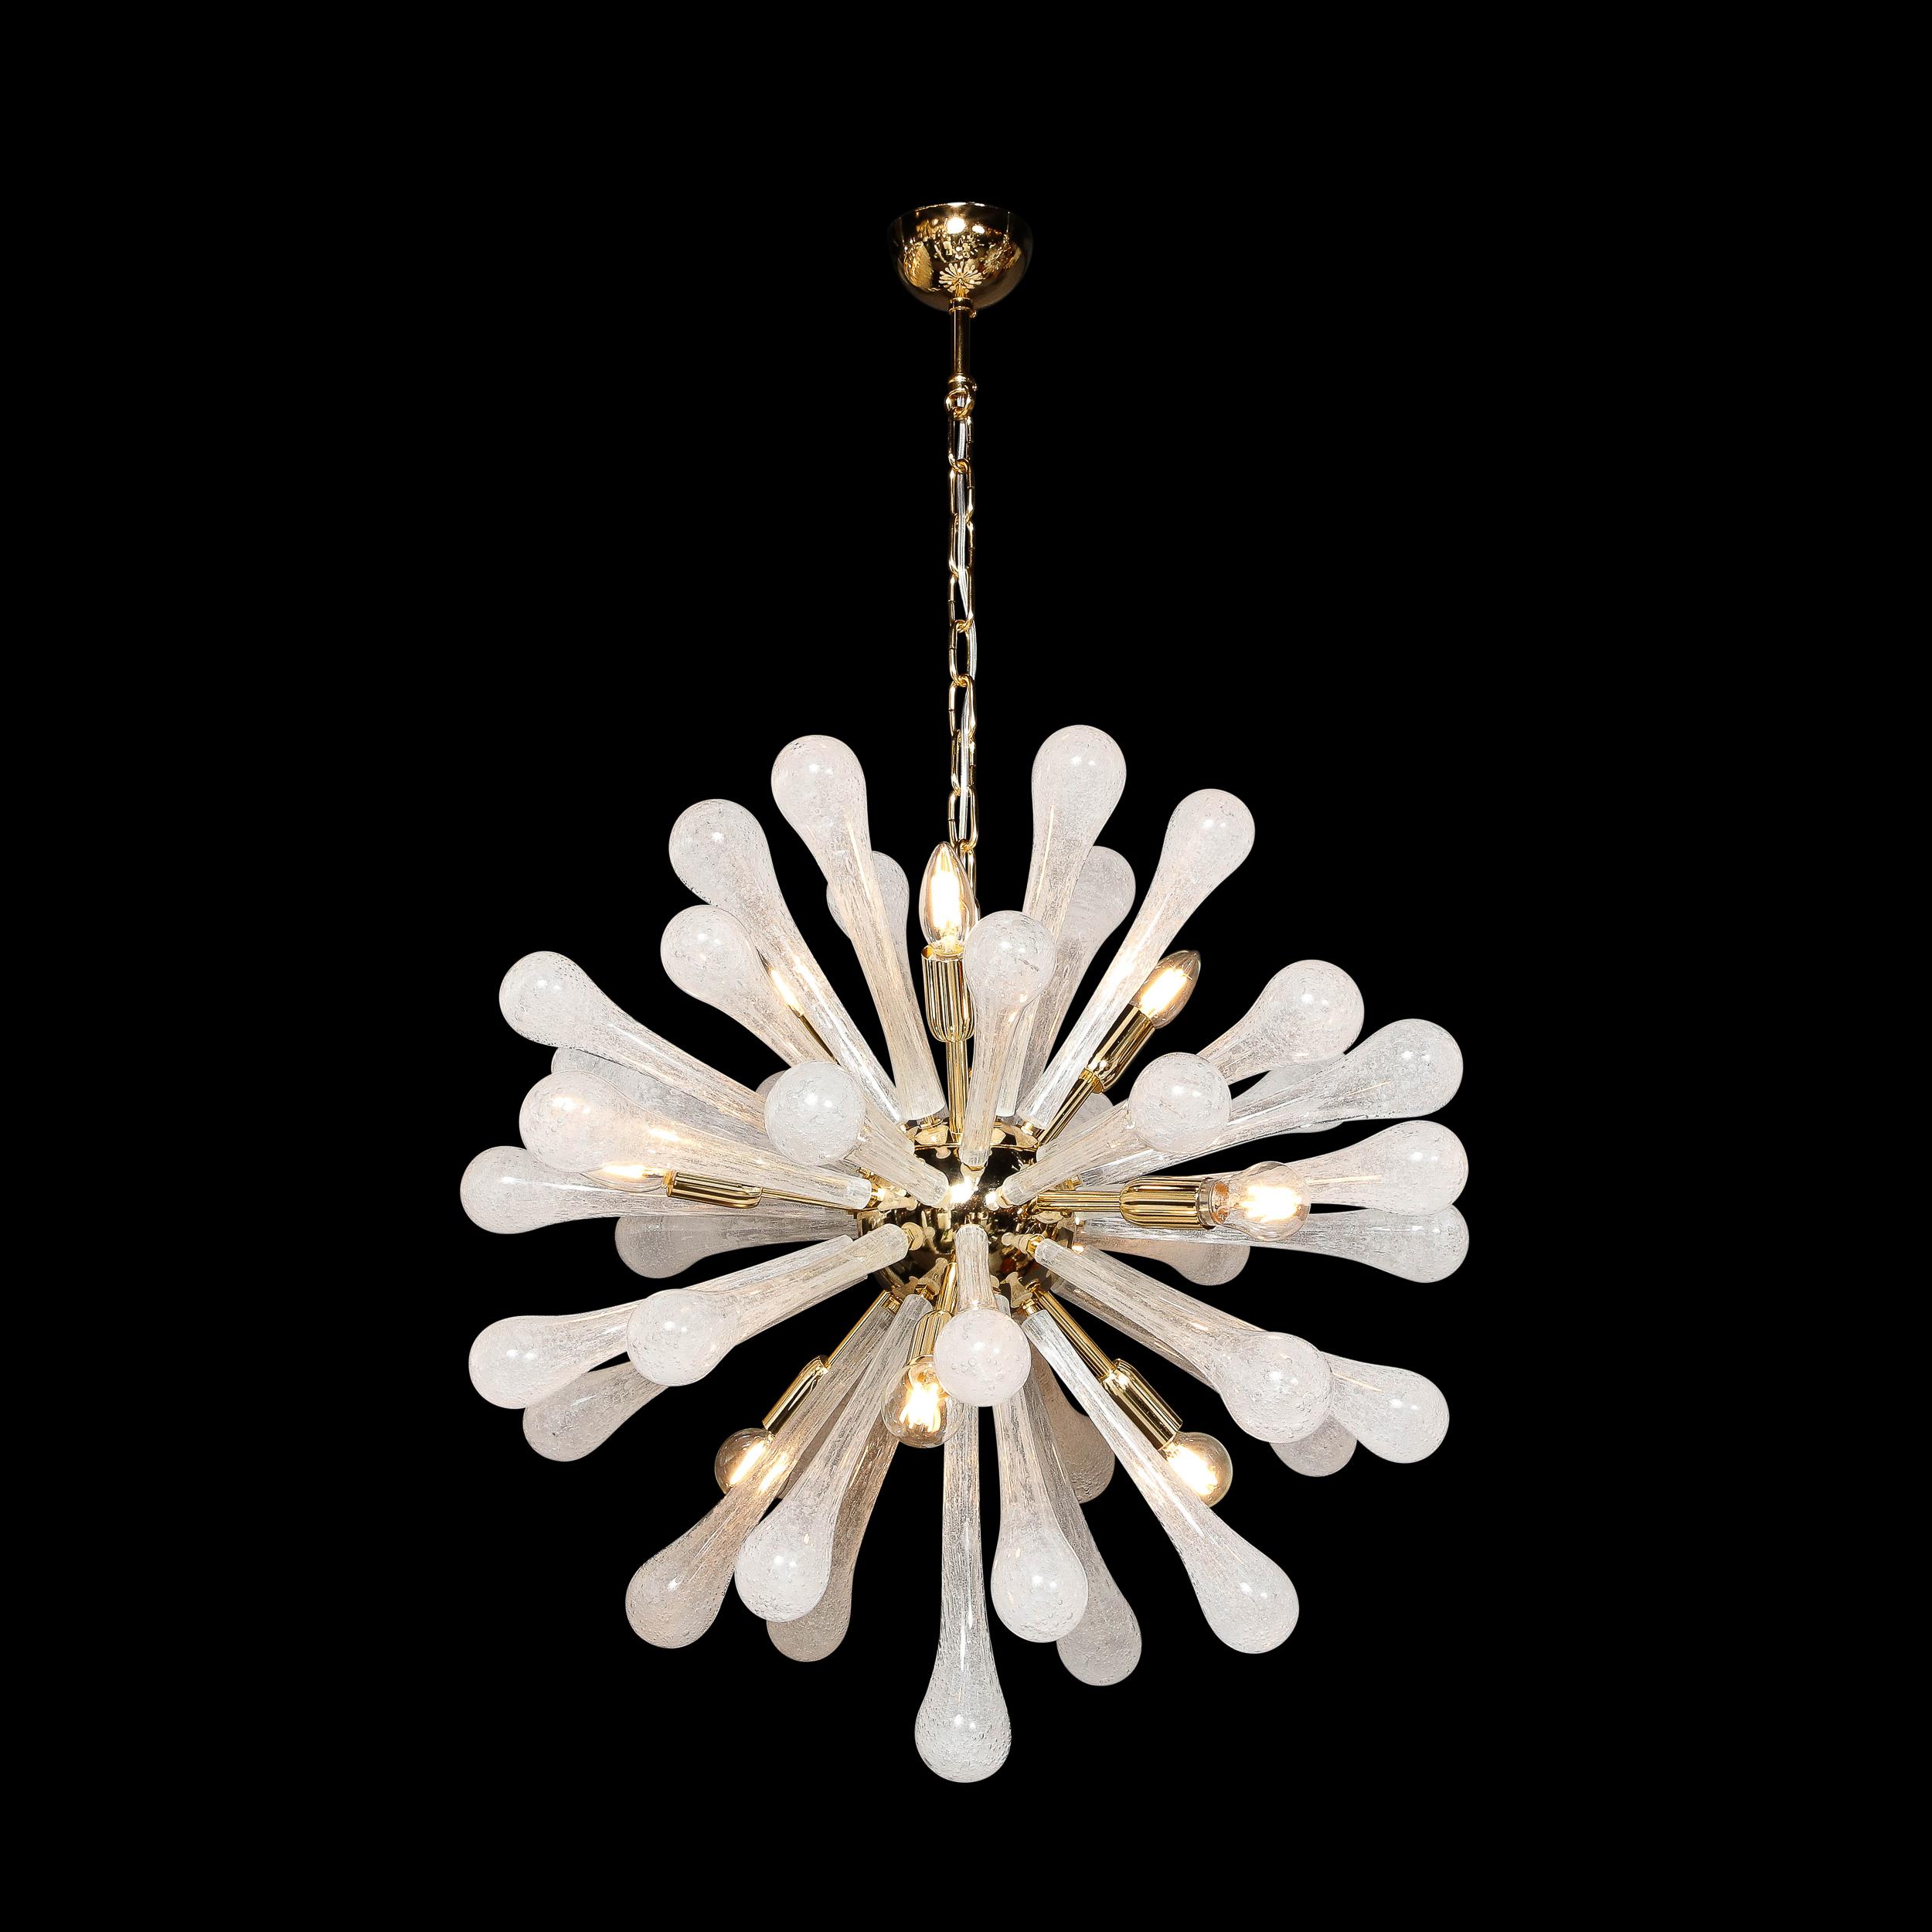 This gorgeous and graphic modernist Sputnik chandelier was realized in Murano, Italy- the island off the coast of Venice renowned for centuries for its superlative glass production. It features an abundance of white hand blown Murano textured glass